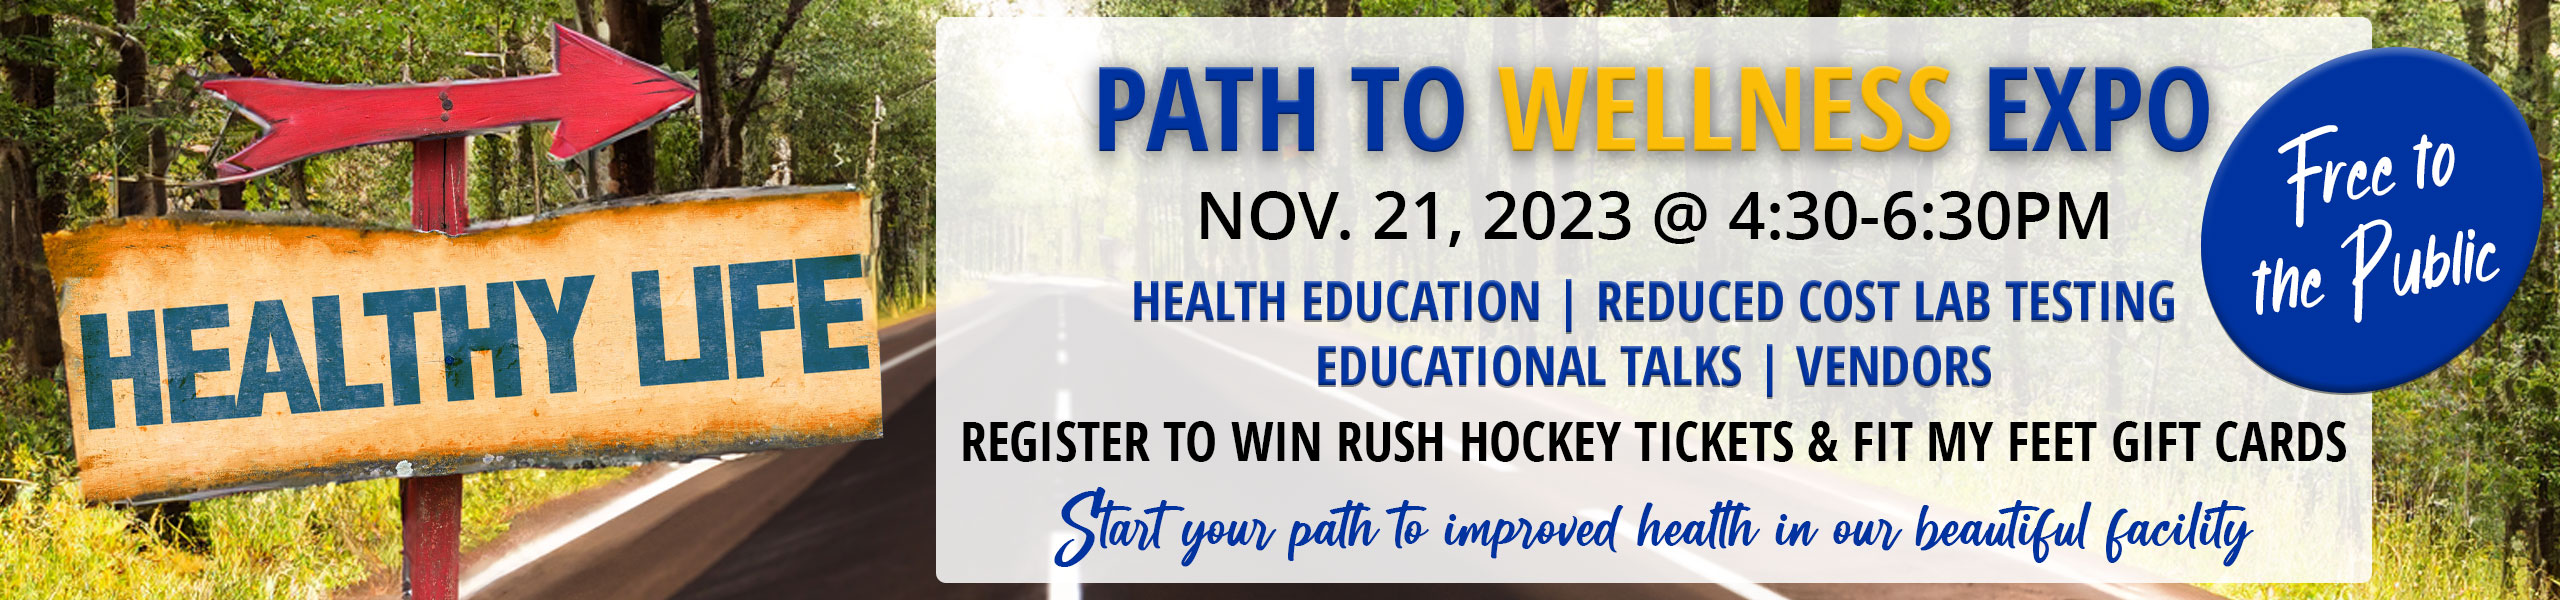 Path To Wellness Expo
Nov. 21, 2023
4:30-6:30pm
Free to the Public
Health Education
Reduced Cost Lab Testing
Educational Talks
Vendors
Register to WIN Rush Hockey Tickets & Fit My Feet Gift Cards
 
Start your path to improved health in our beautiful facility